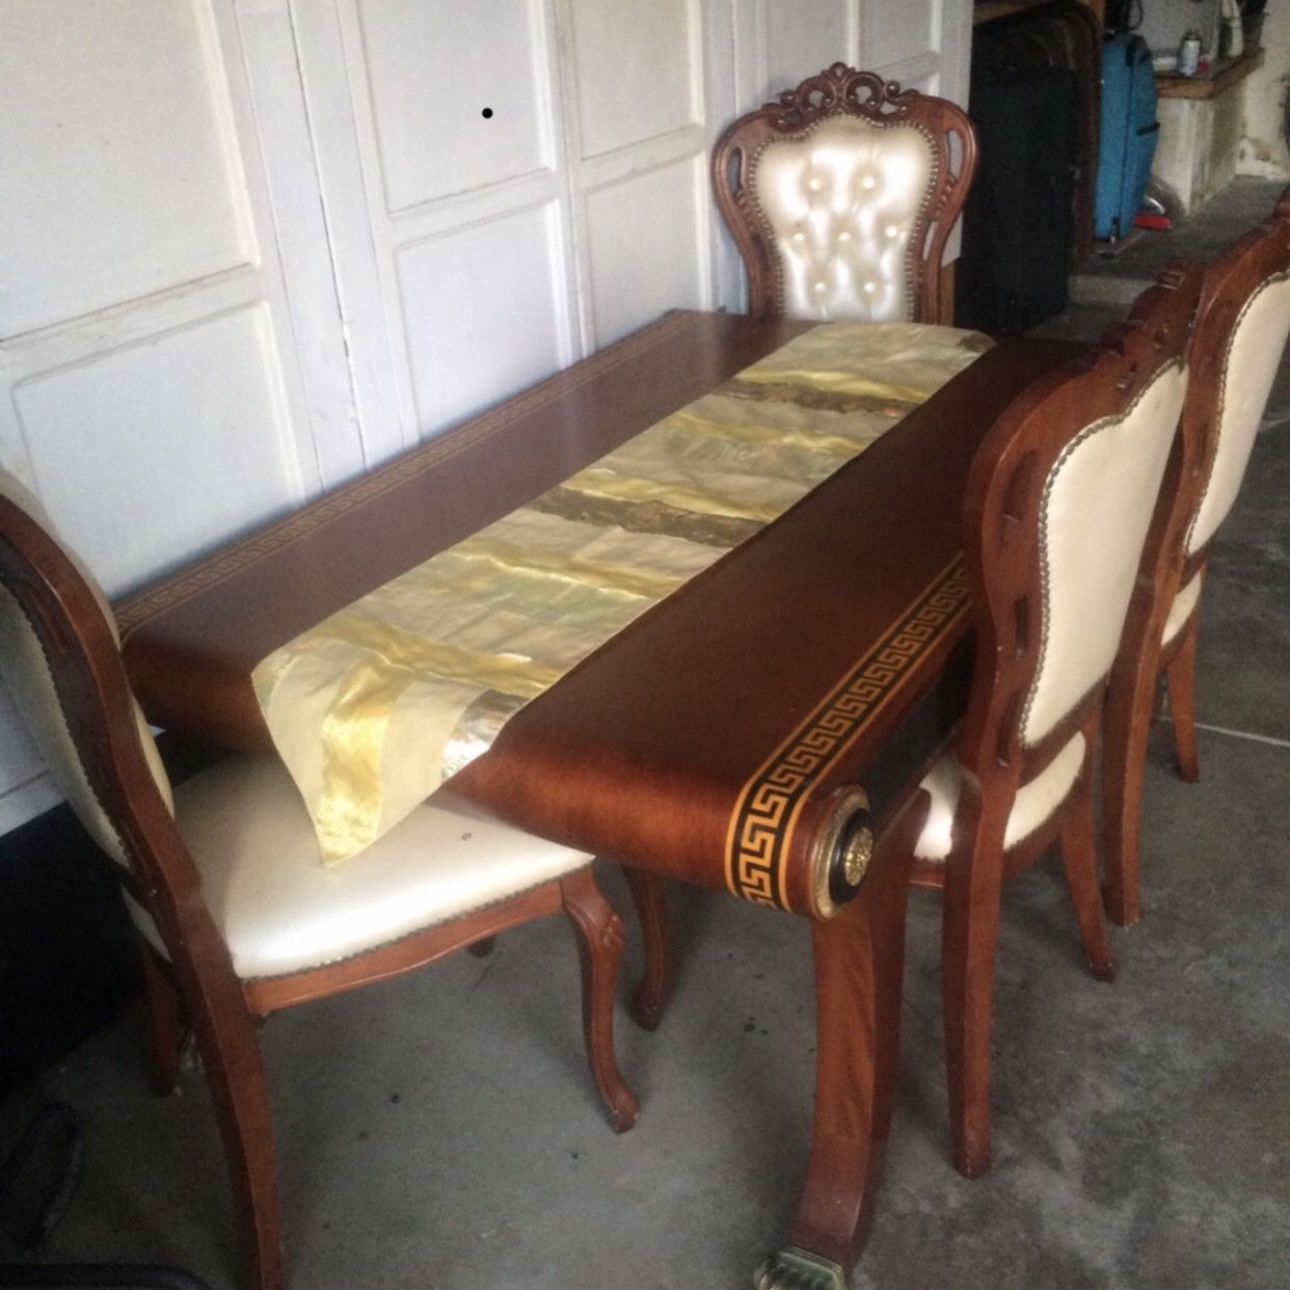 Dining  Table With The 4 L Chairs Good Condition For $1200